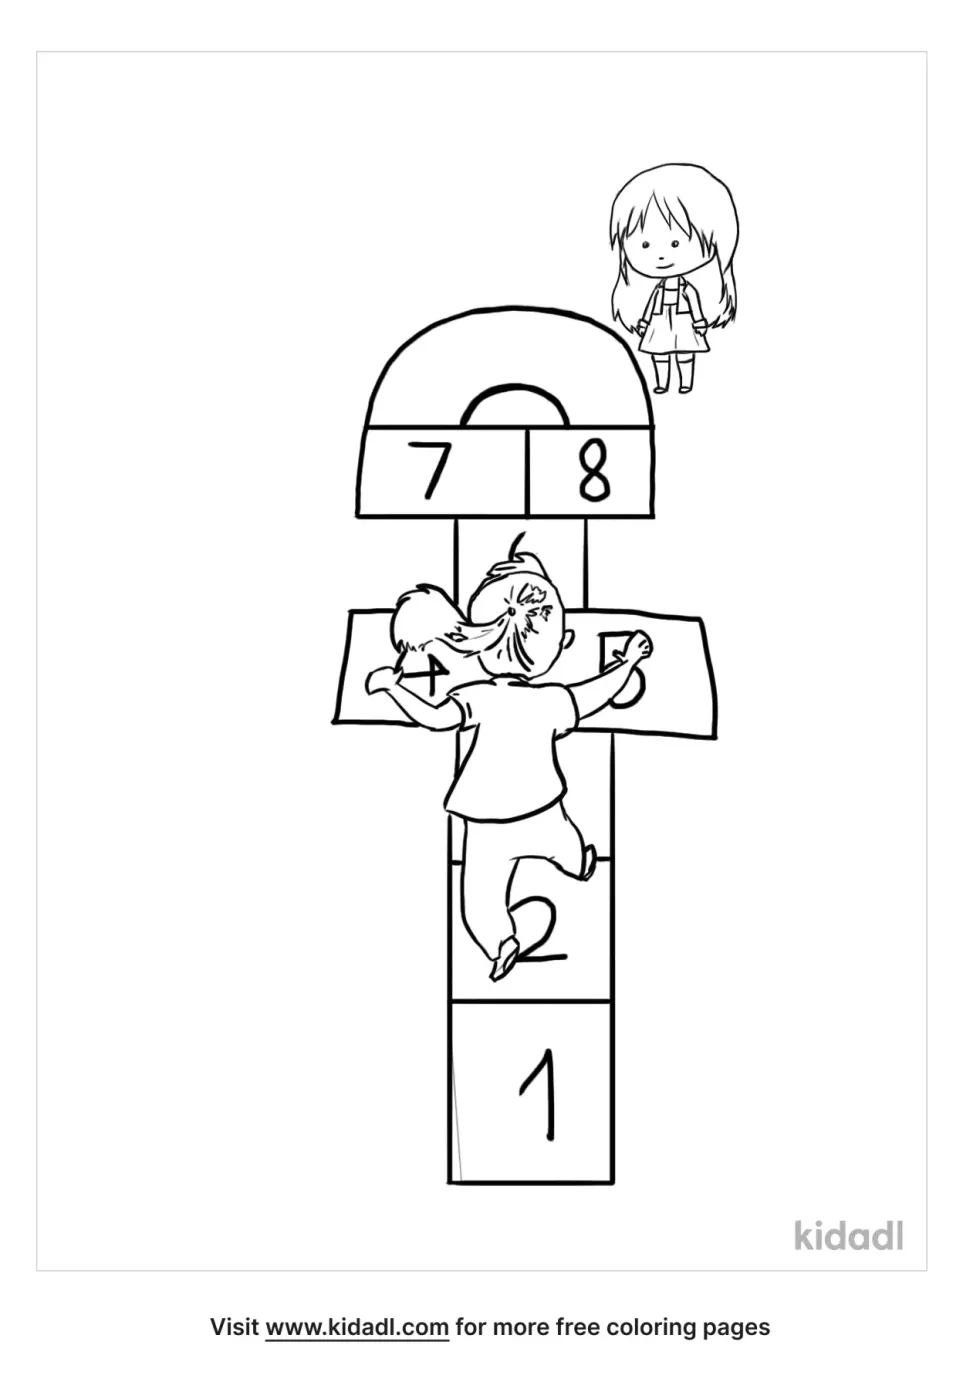 Kids Playing A Game Coloring Page